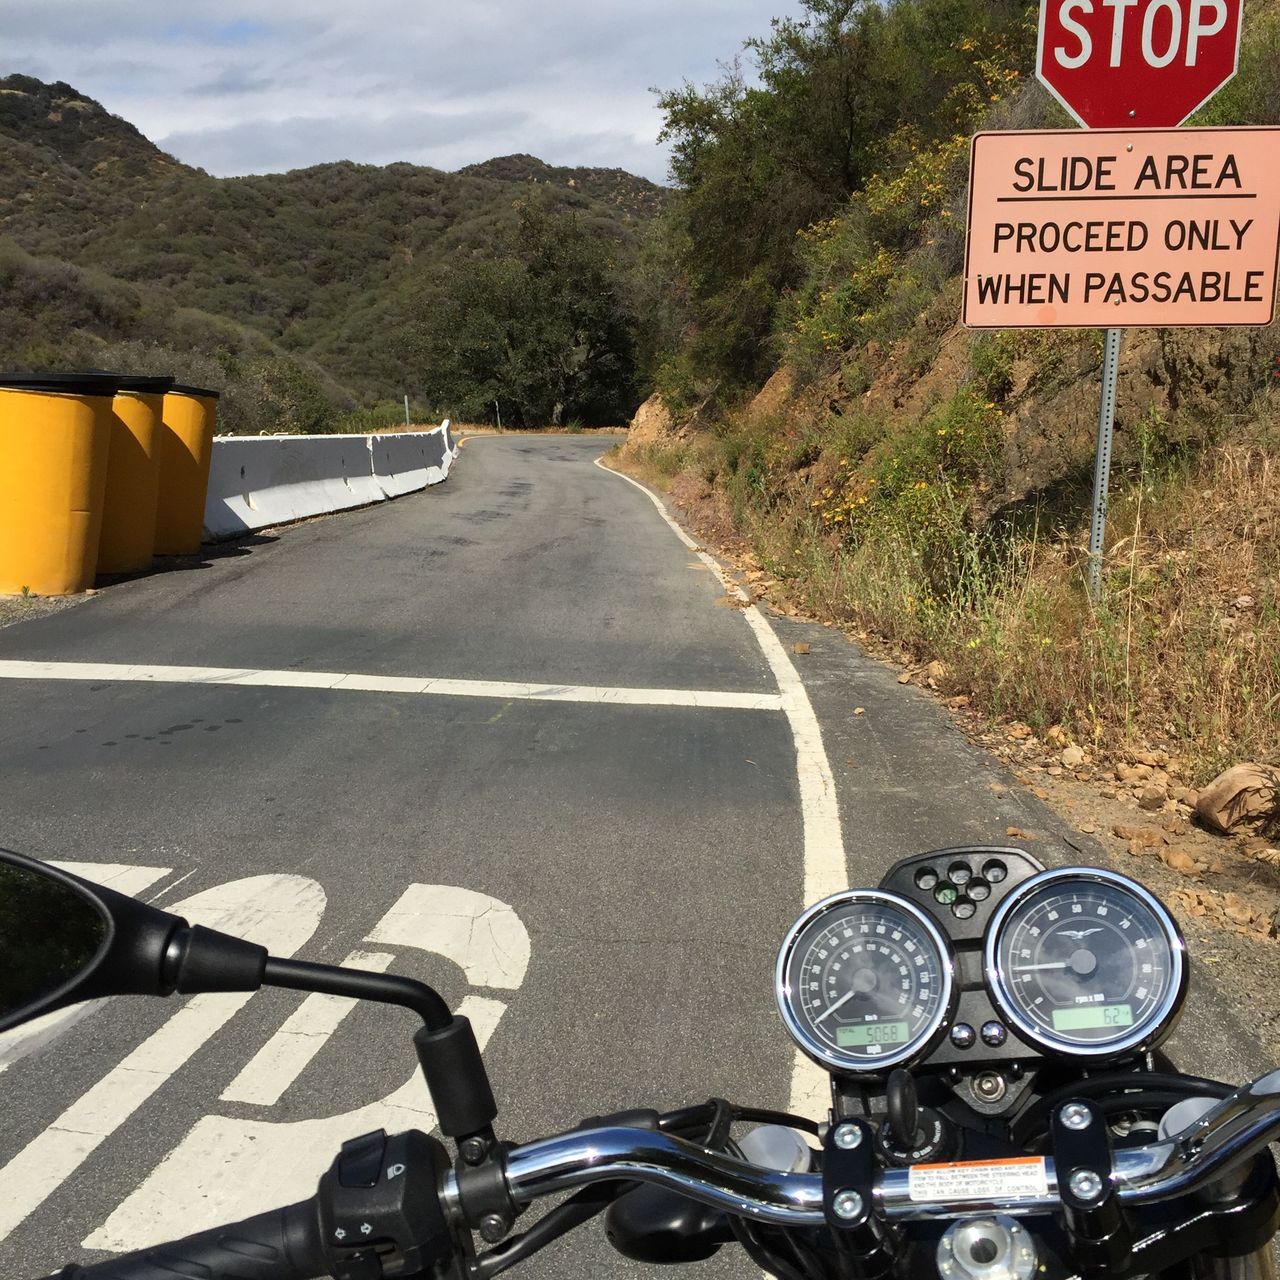 At the top of Tuna Canyon in the Malibu Mountains where the road becomes a one-way